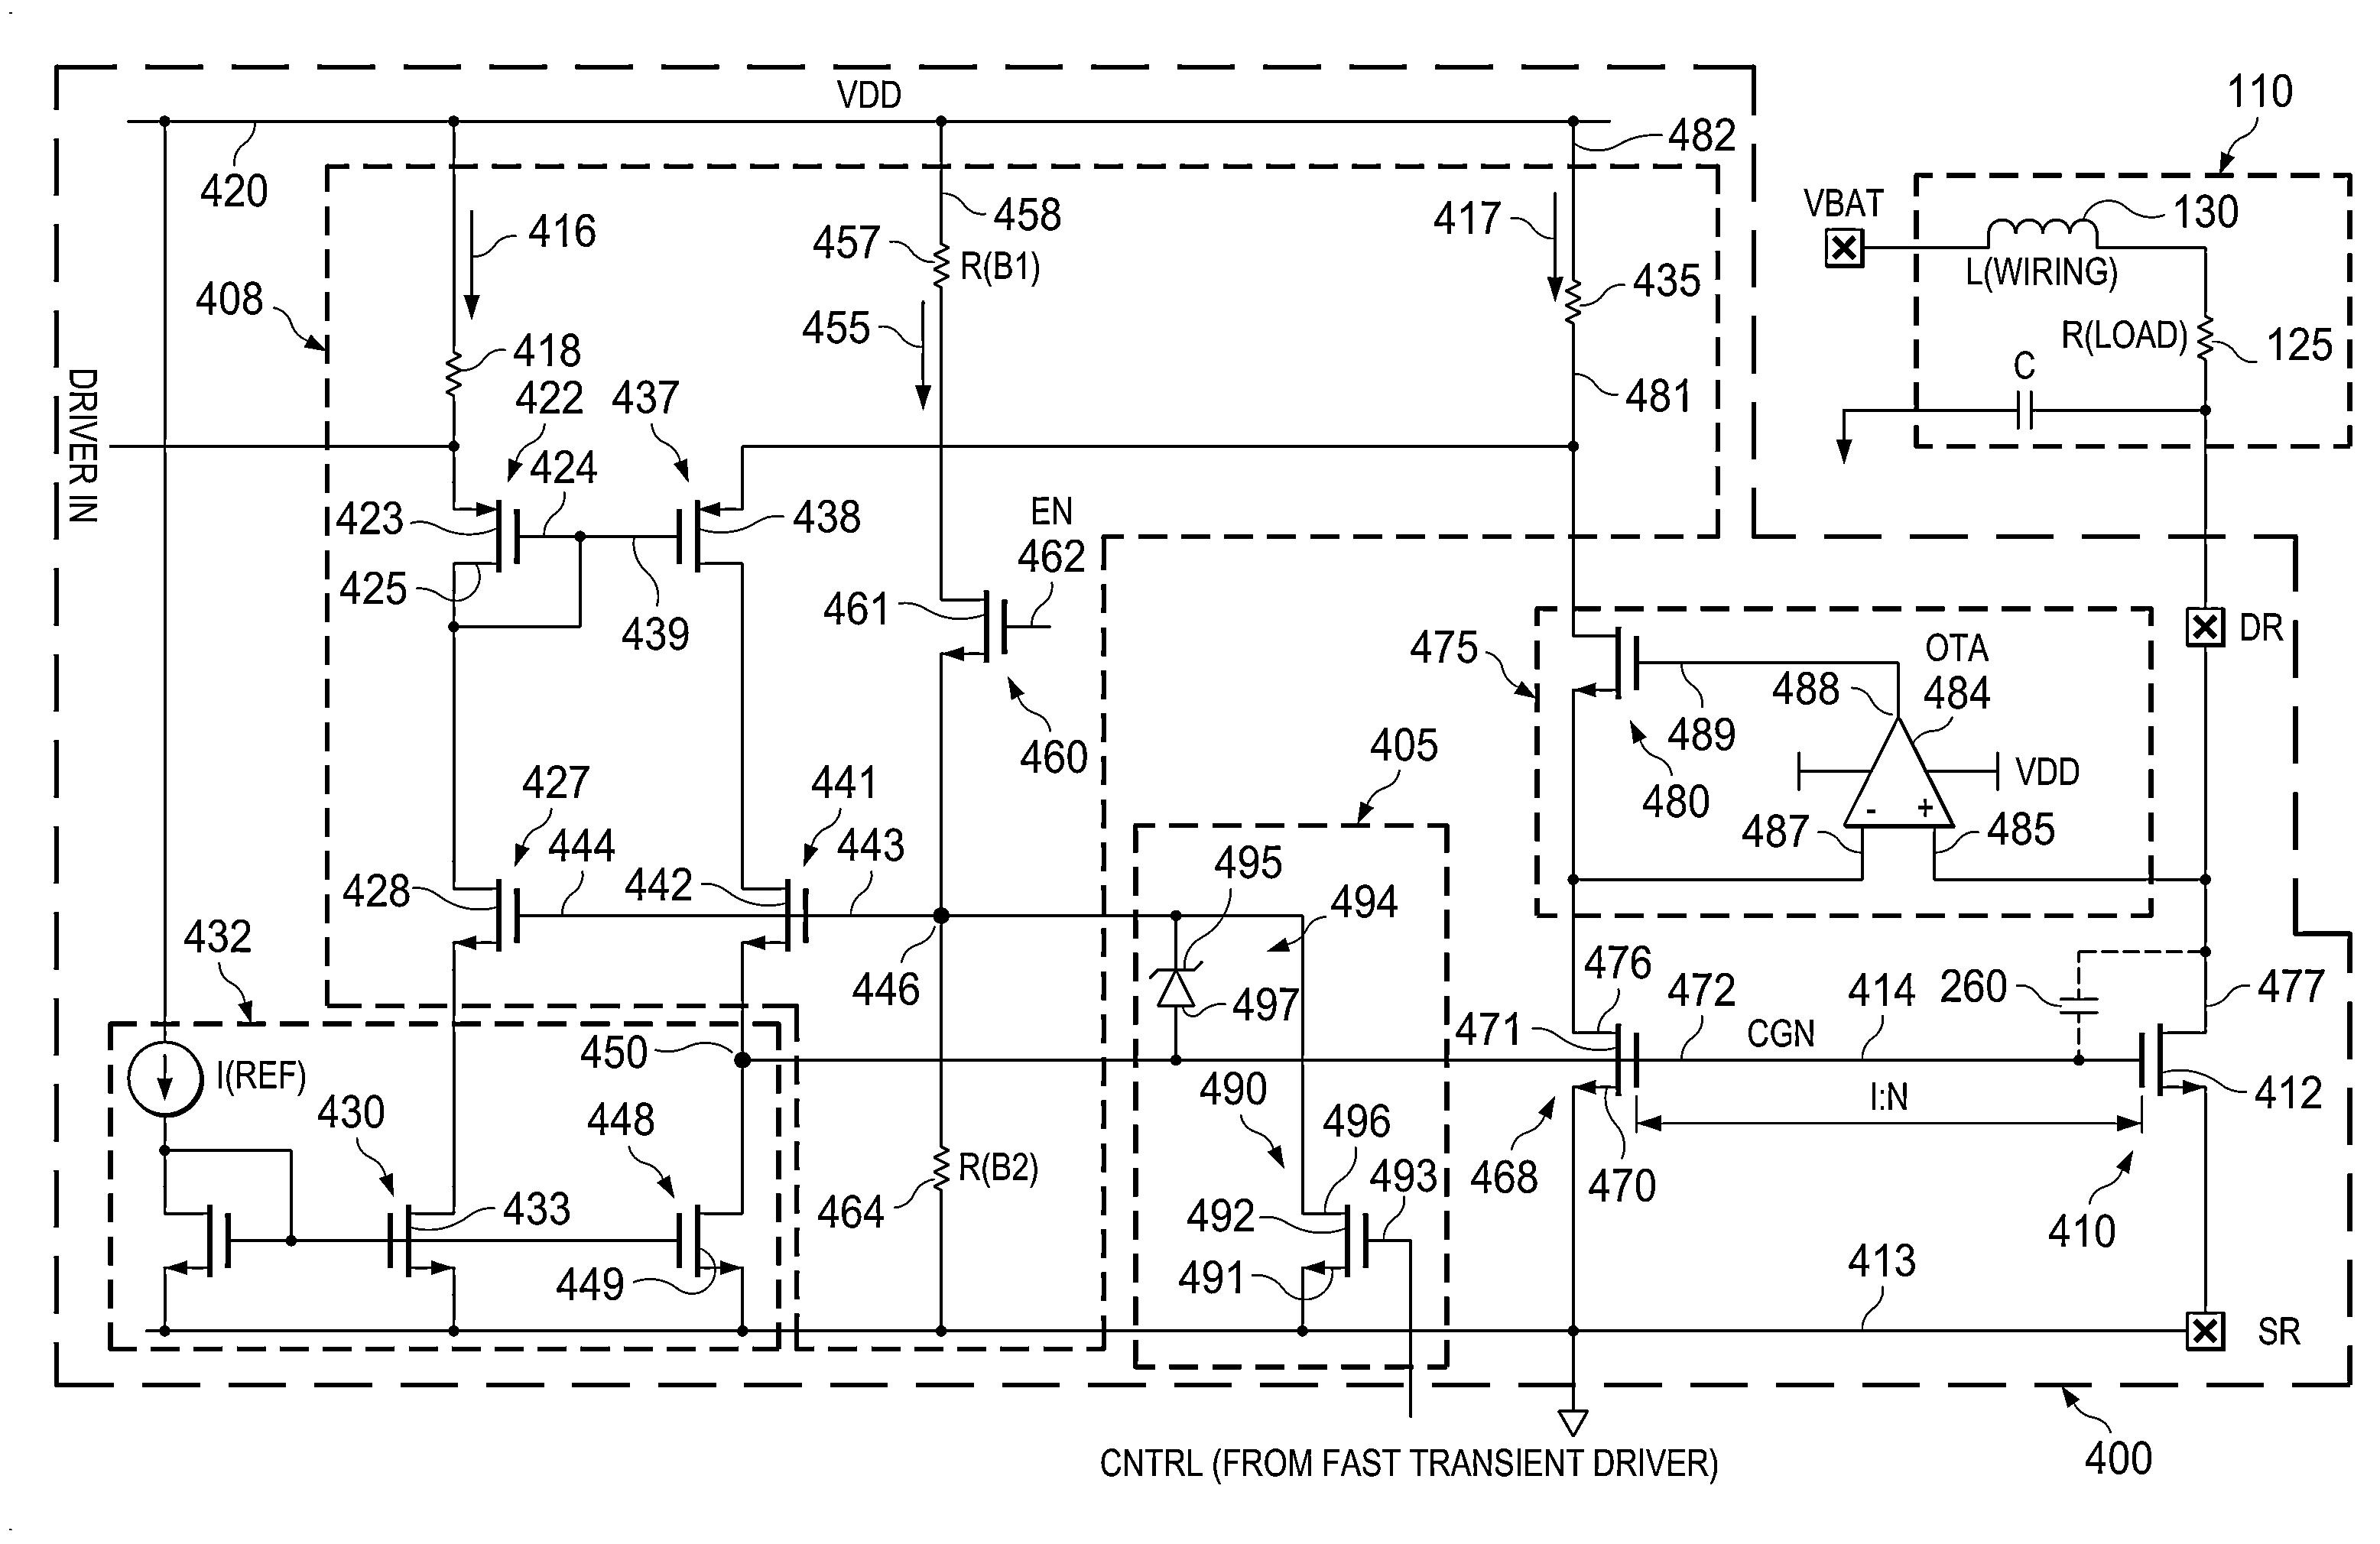 Driver current control apparatus and methods